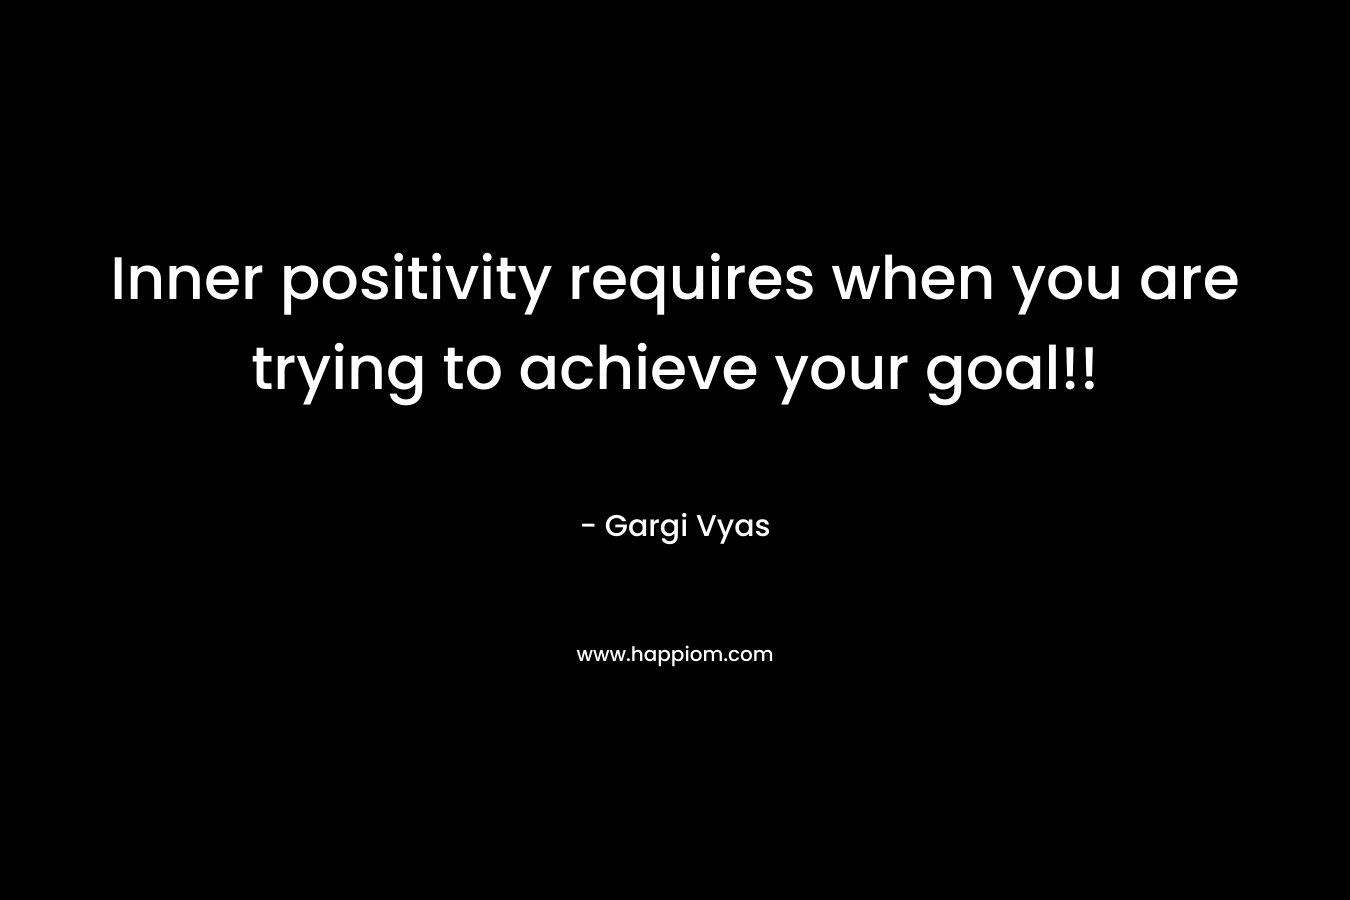 Inner positivity requires when you are trying to achieve your goal!! – Gargi Vyas